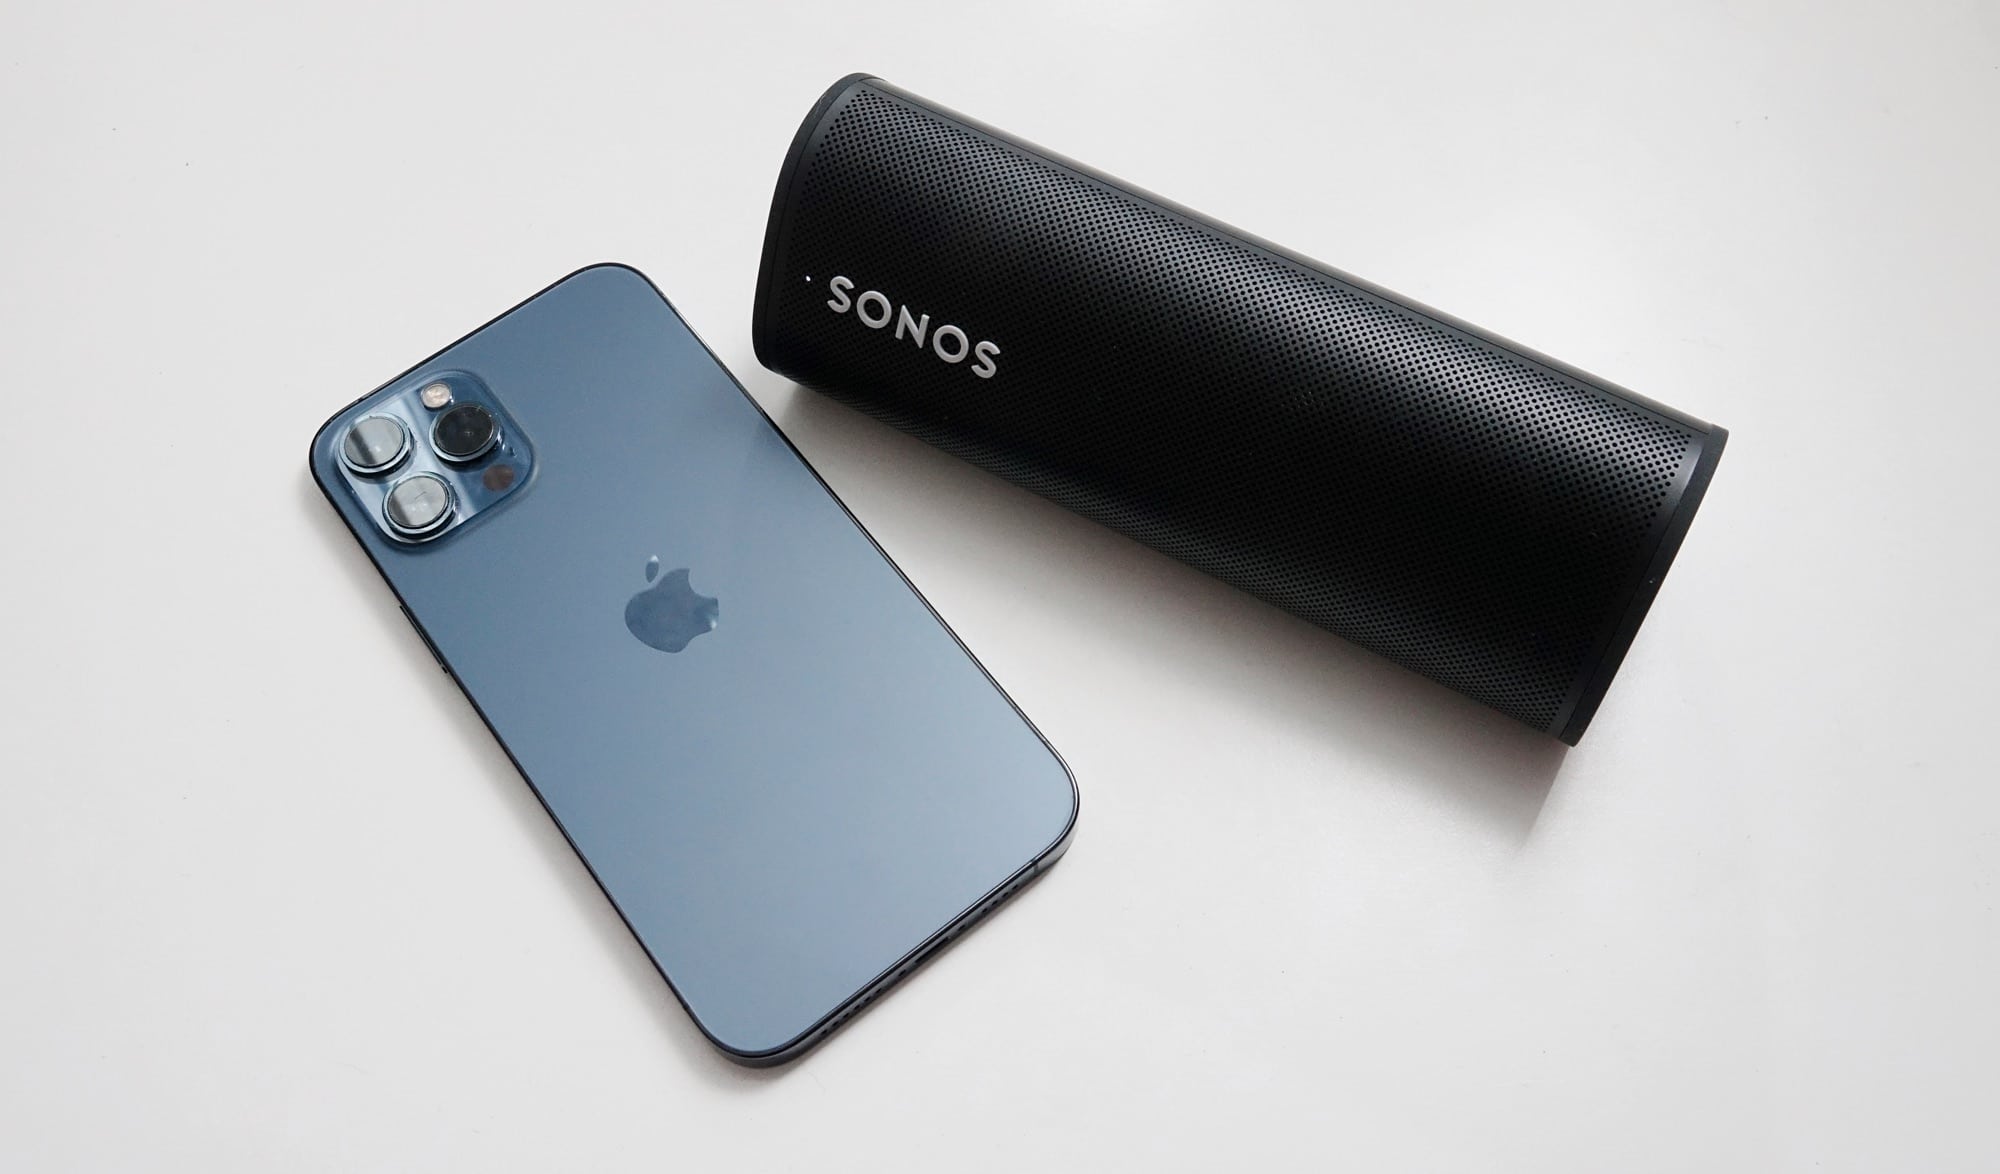 The Sonos Roam next to an iPhone 12 Pro Max.